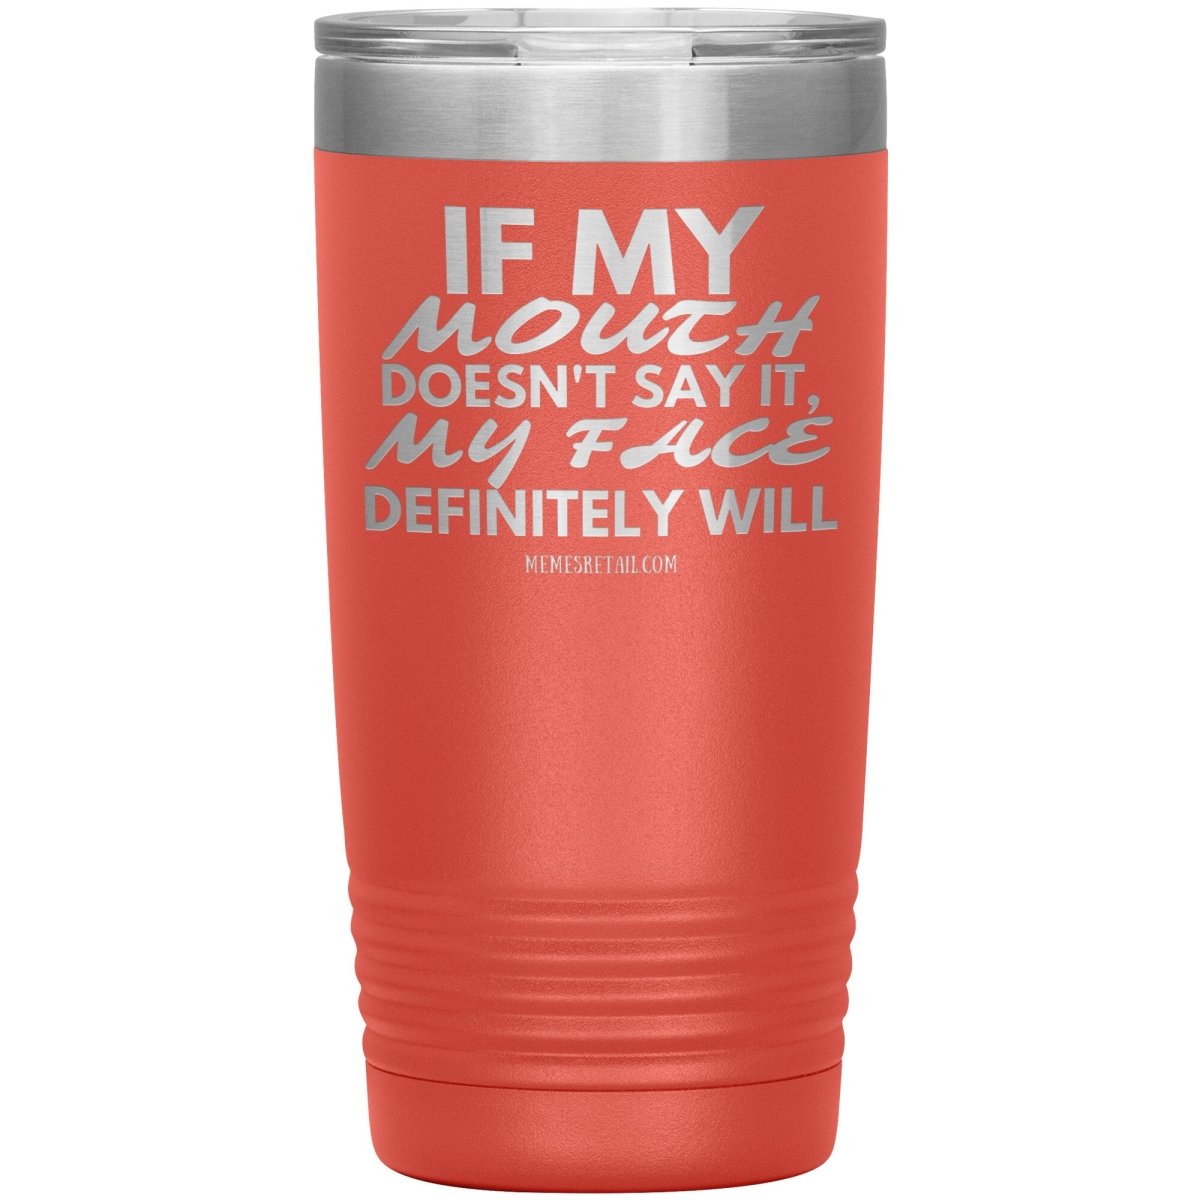 If my mouth doesn't say it, my face definitely will Tumblers, 20oz Insulated Tumbler / Coral - MemesRetail.com